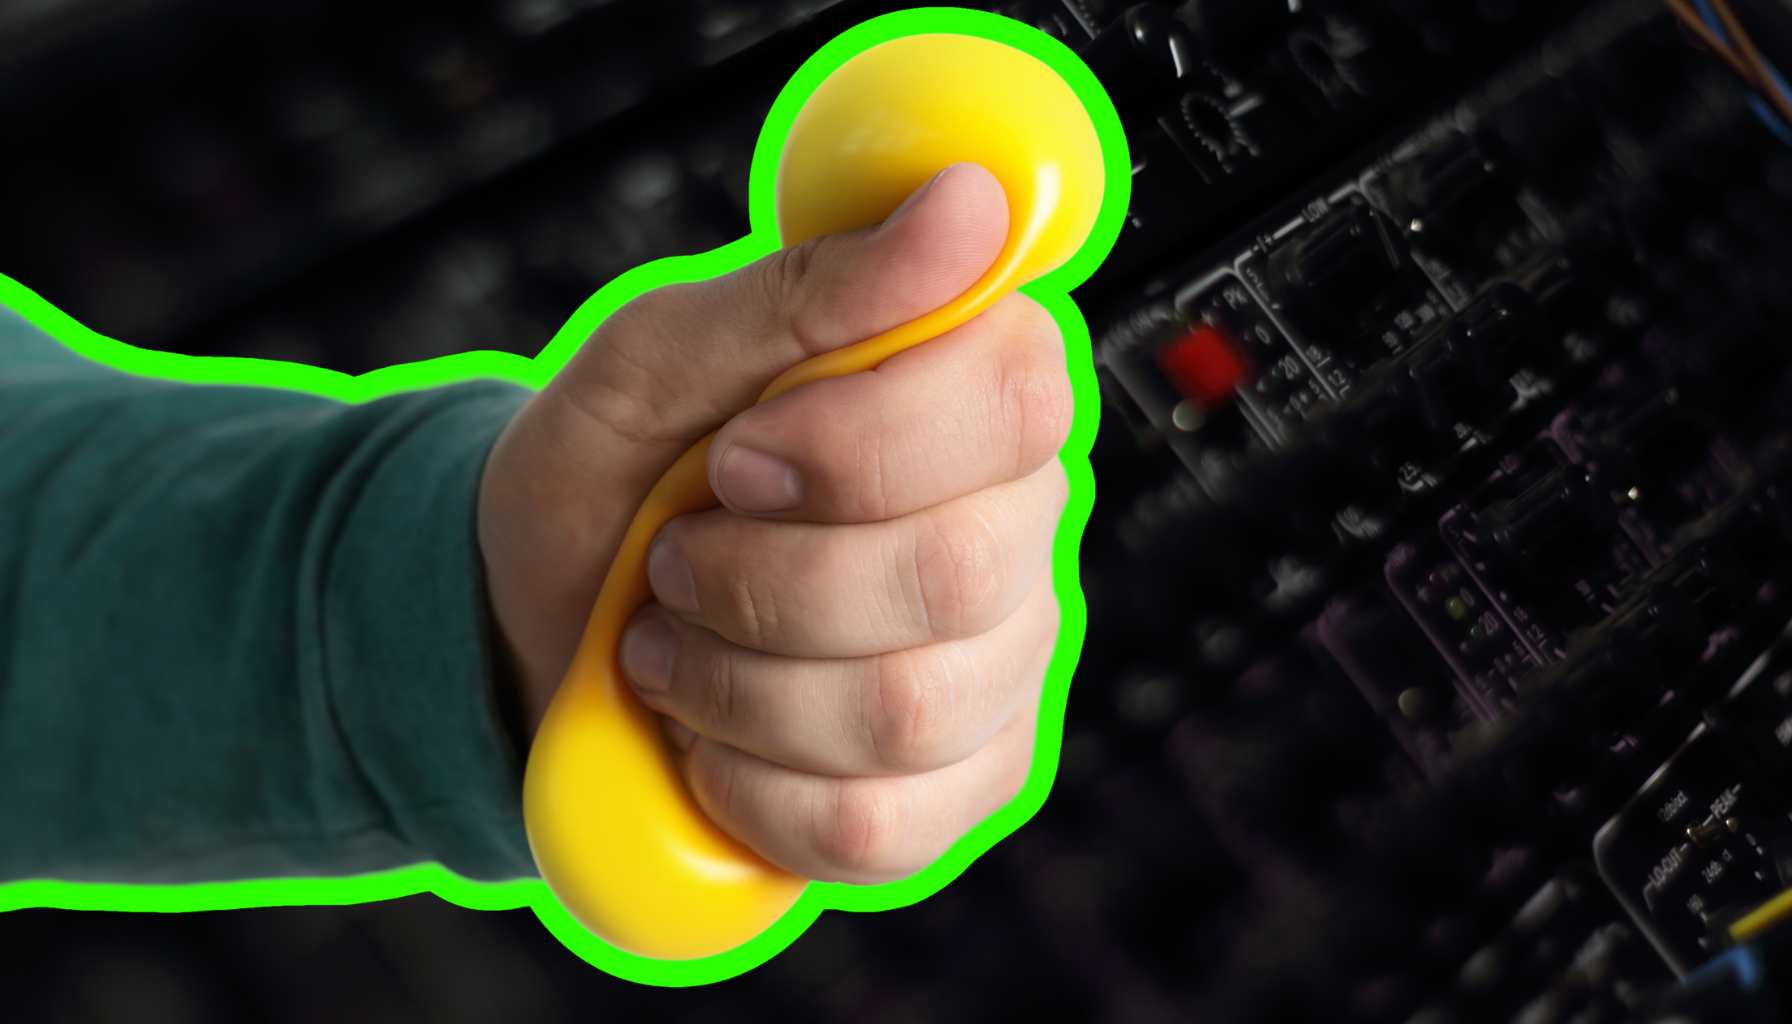 man squeezing a sponge compressing it in front of a rack of sophisticated audio equipment for audio recording and compression